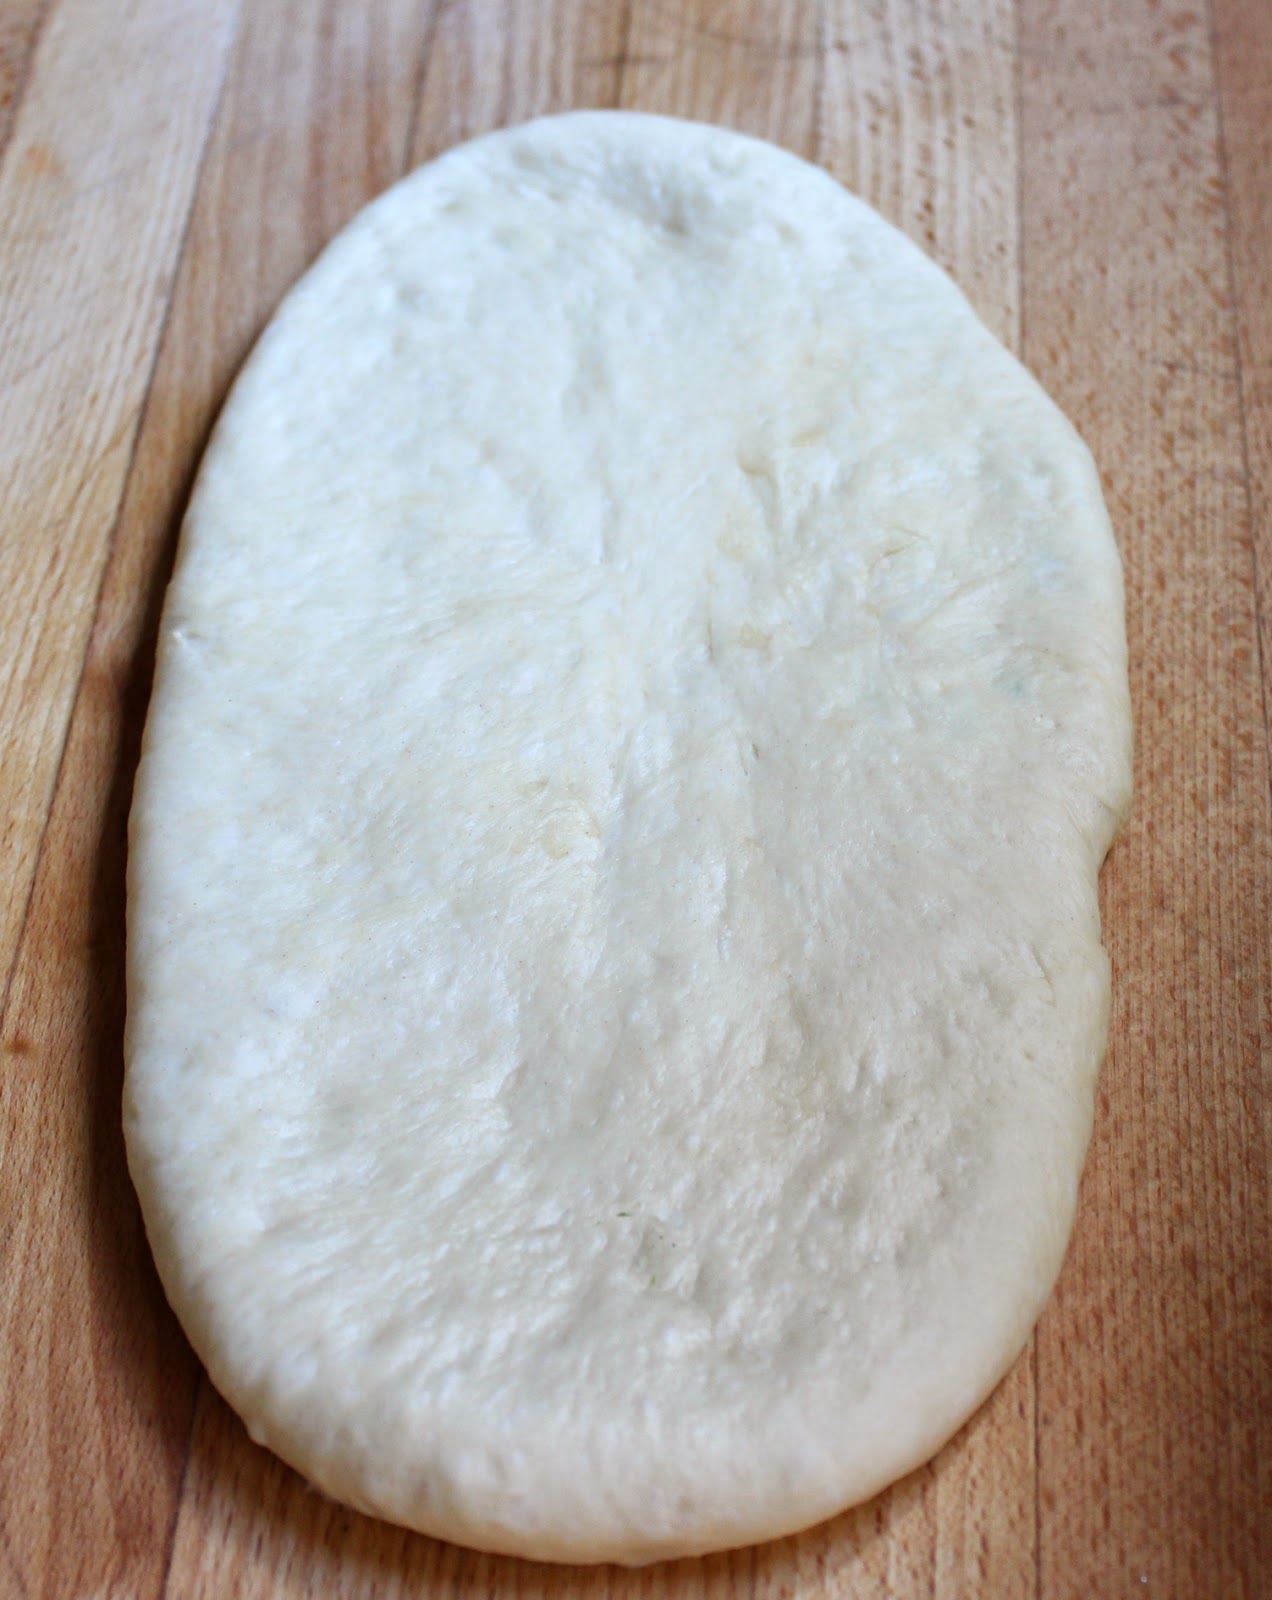 Stuffed naan dough rolled and ready for the oven 